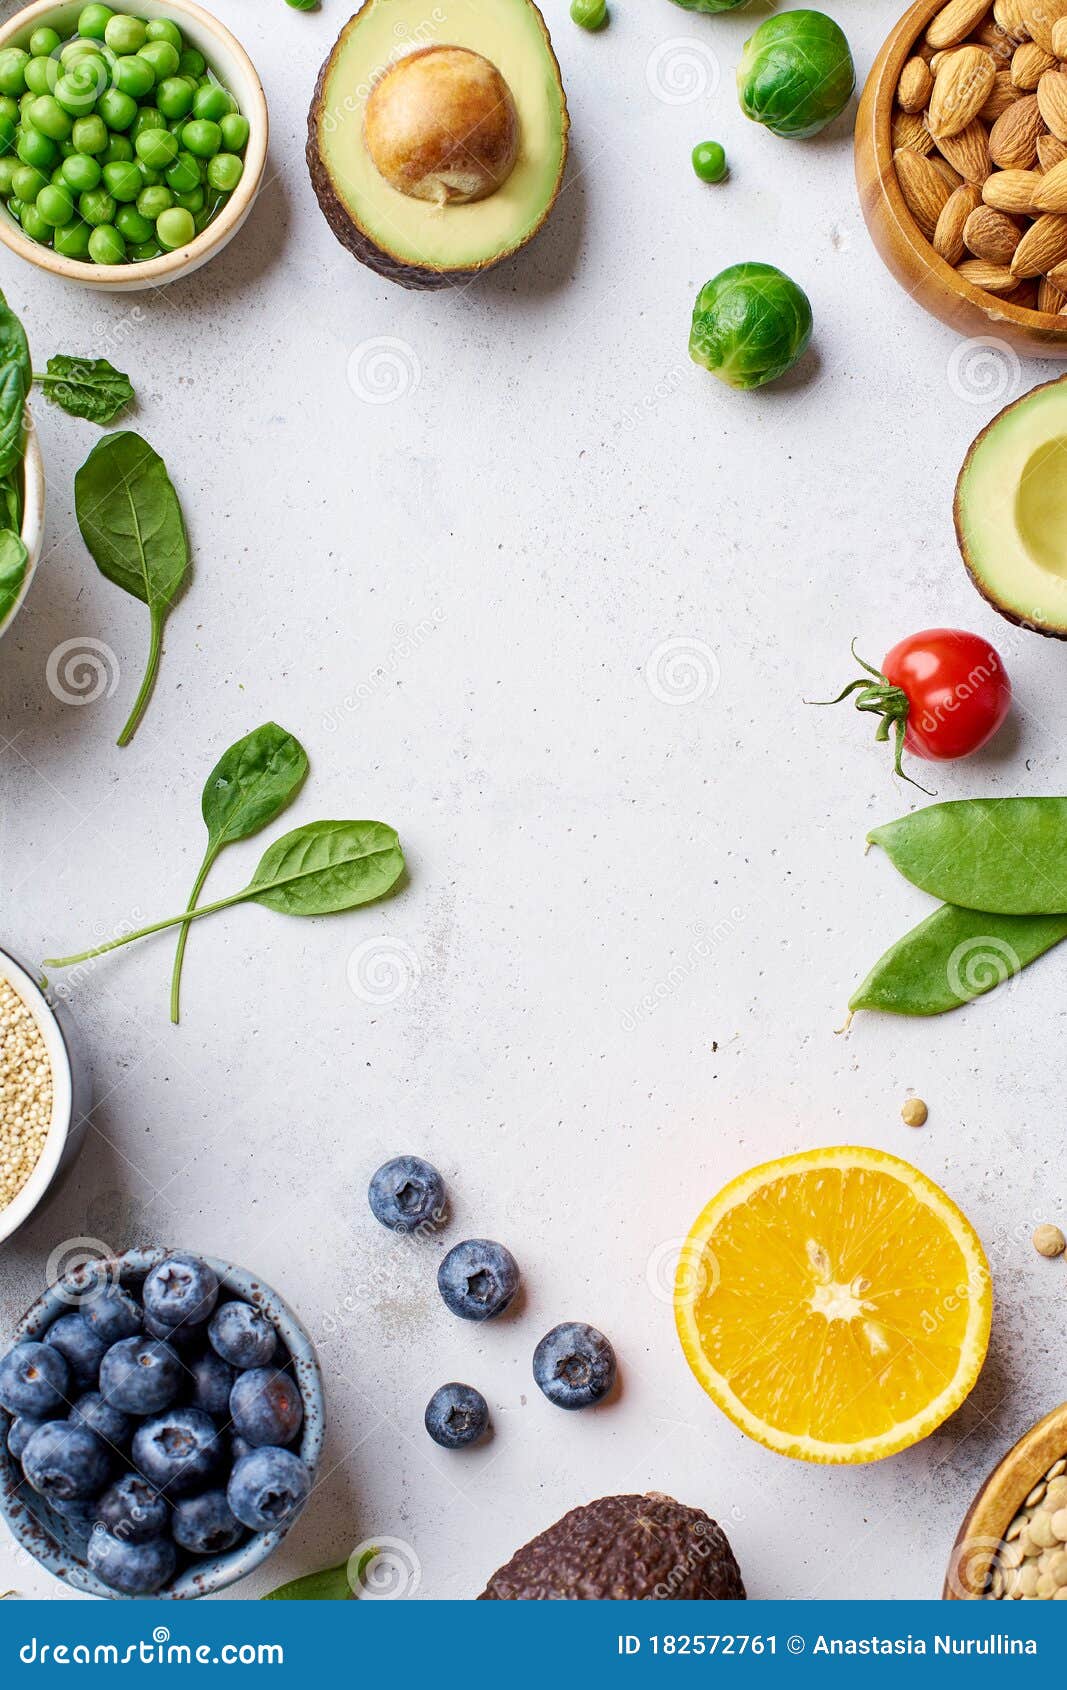 Creative Flat Lay with Healthy Vegetarian Meal Ingredients Stock Image ...